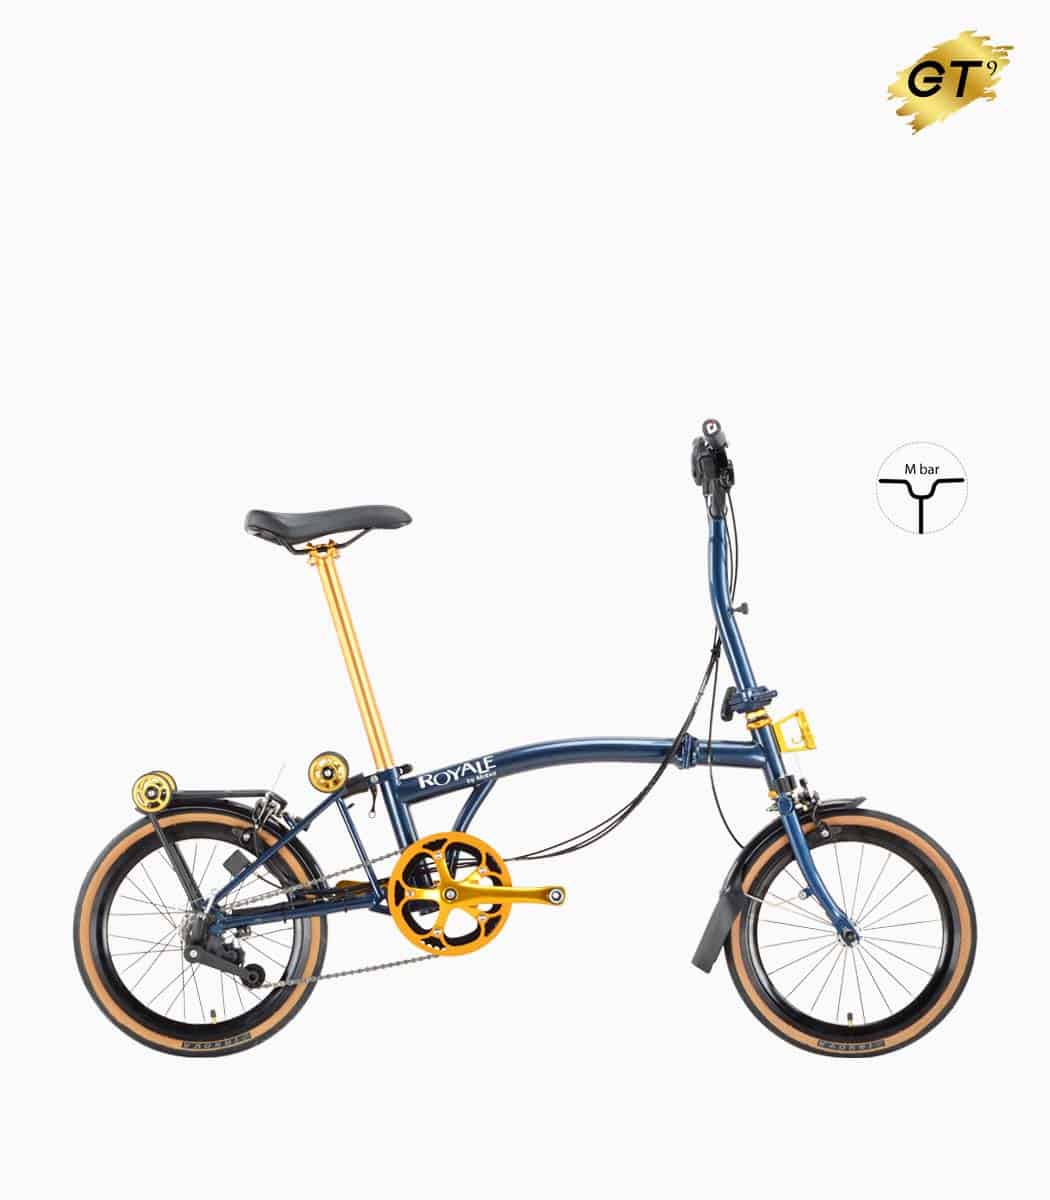 MOBOT ROYALE GT M9 (SPACE BLUE) foldable bicycle gold edition M-bar with tanwall tyres high profile rim right